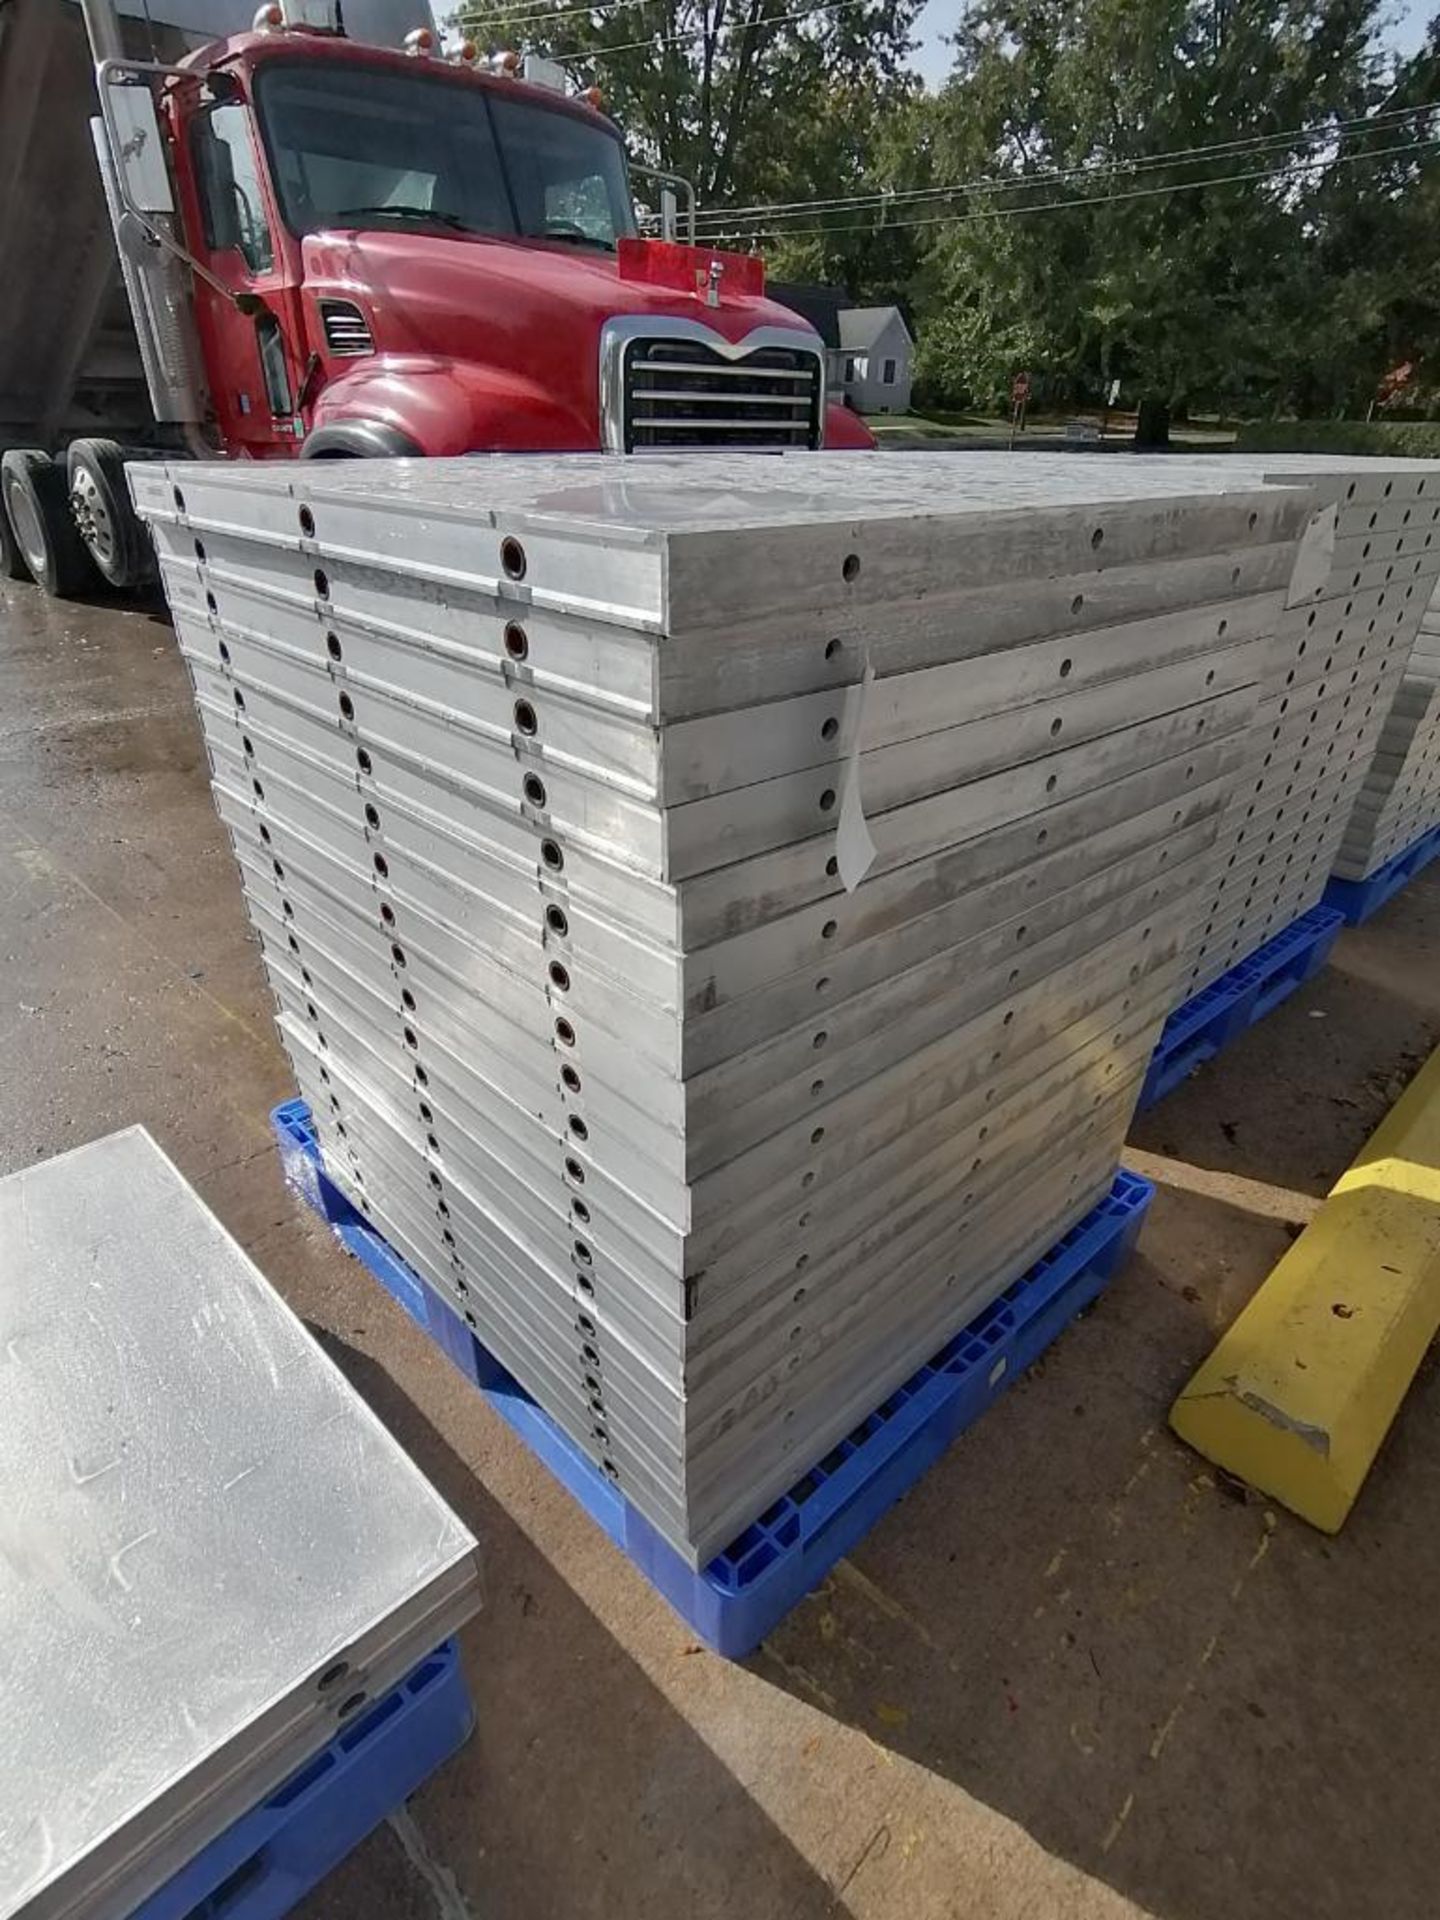 (20) 36" x 3' NEW Badger Smooth Aluminum Concrete Forms 6-12 Hole Pattern. Located in Mt.